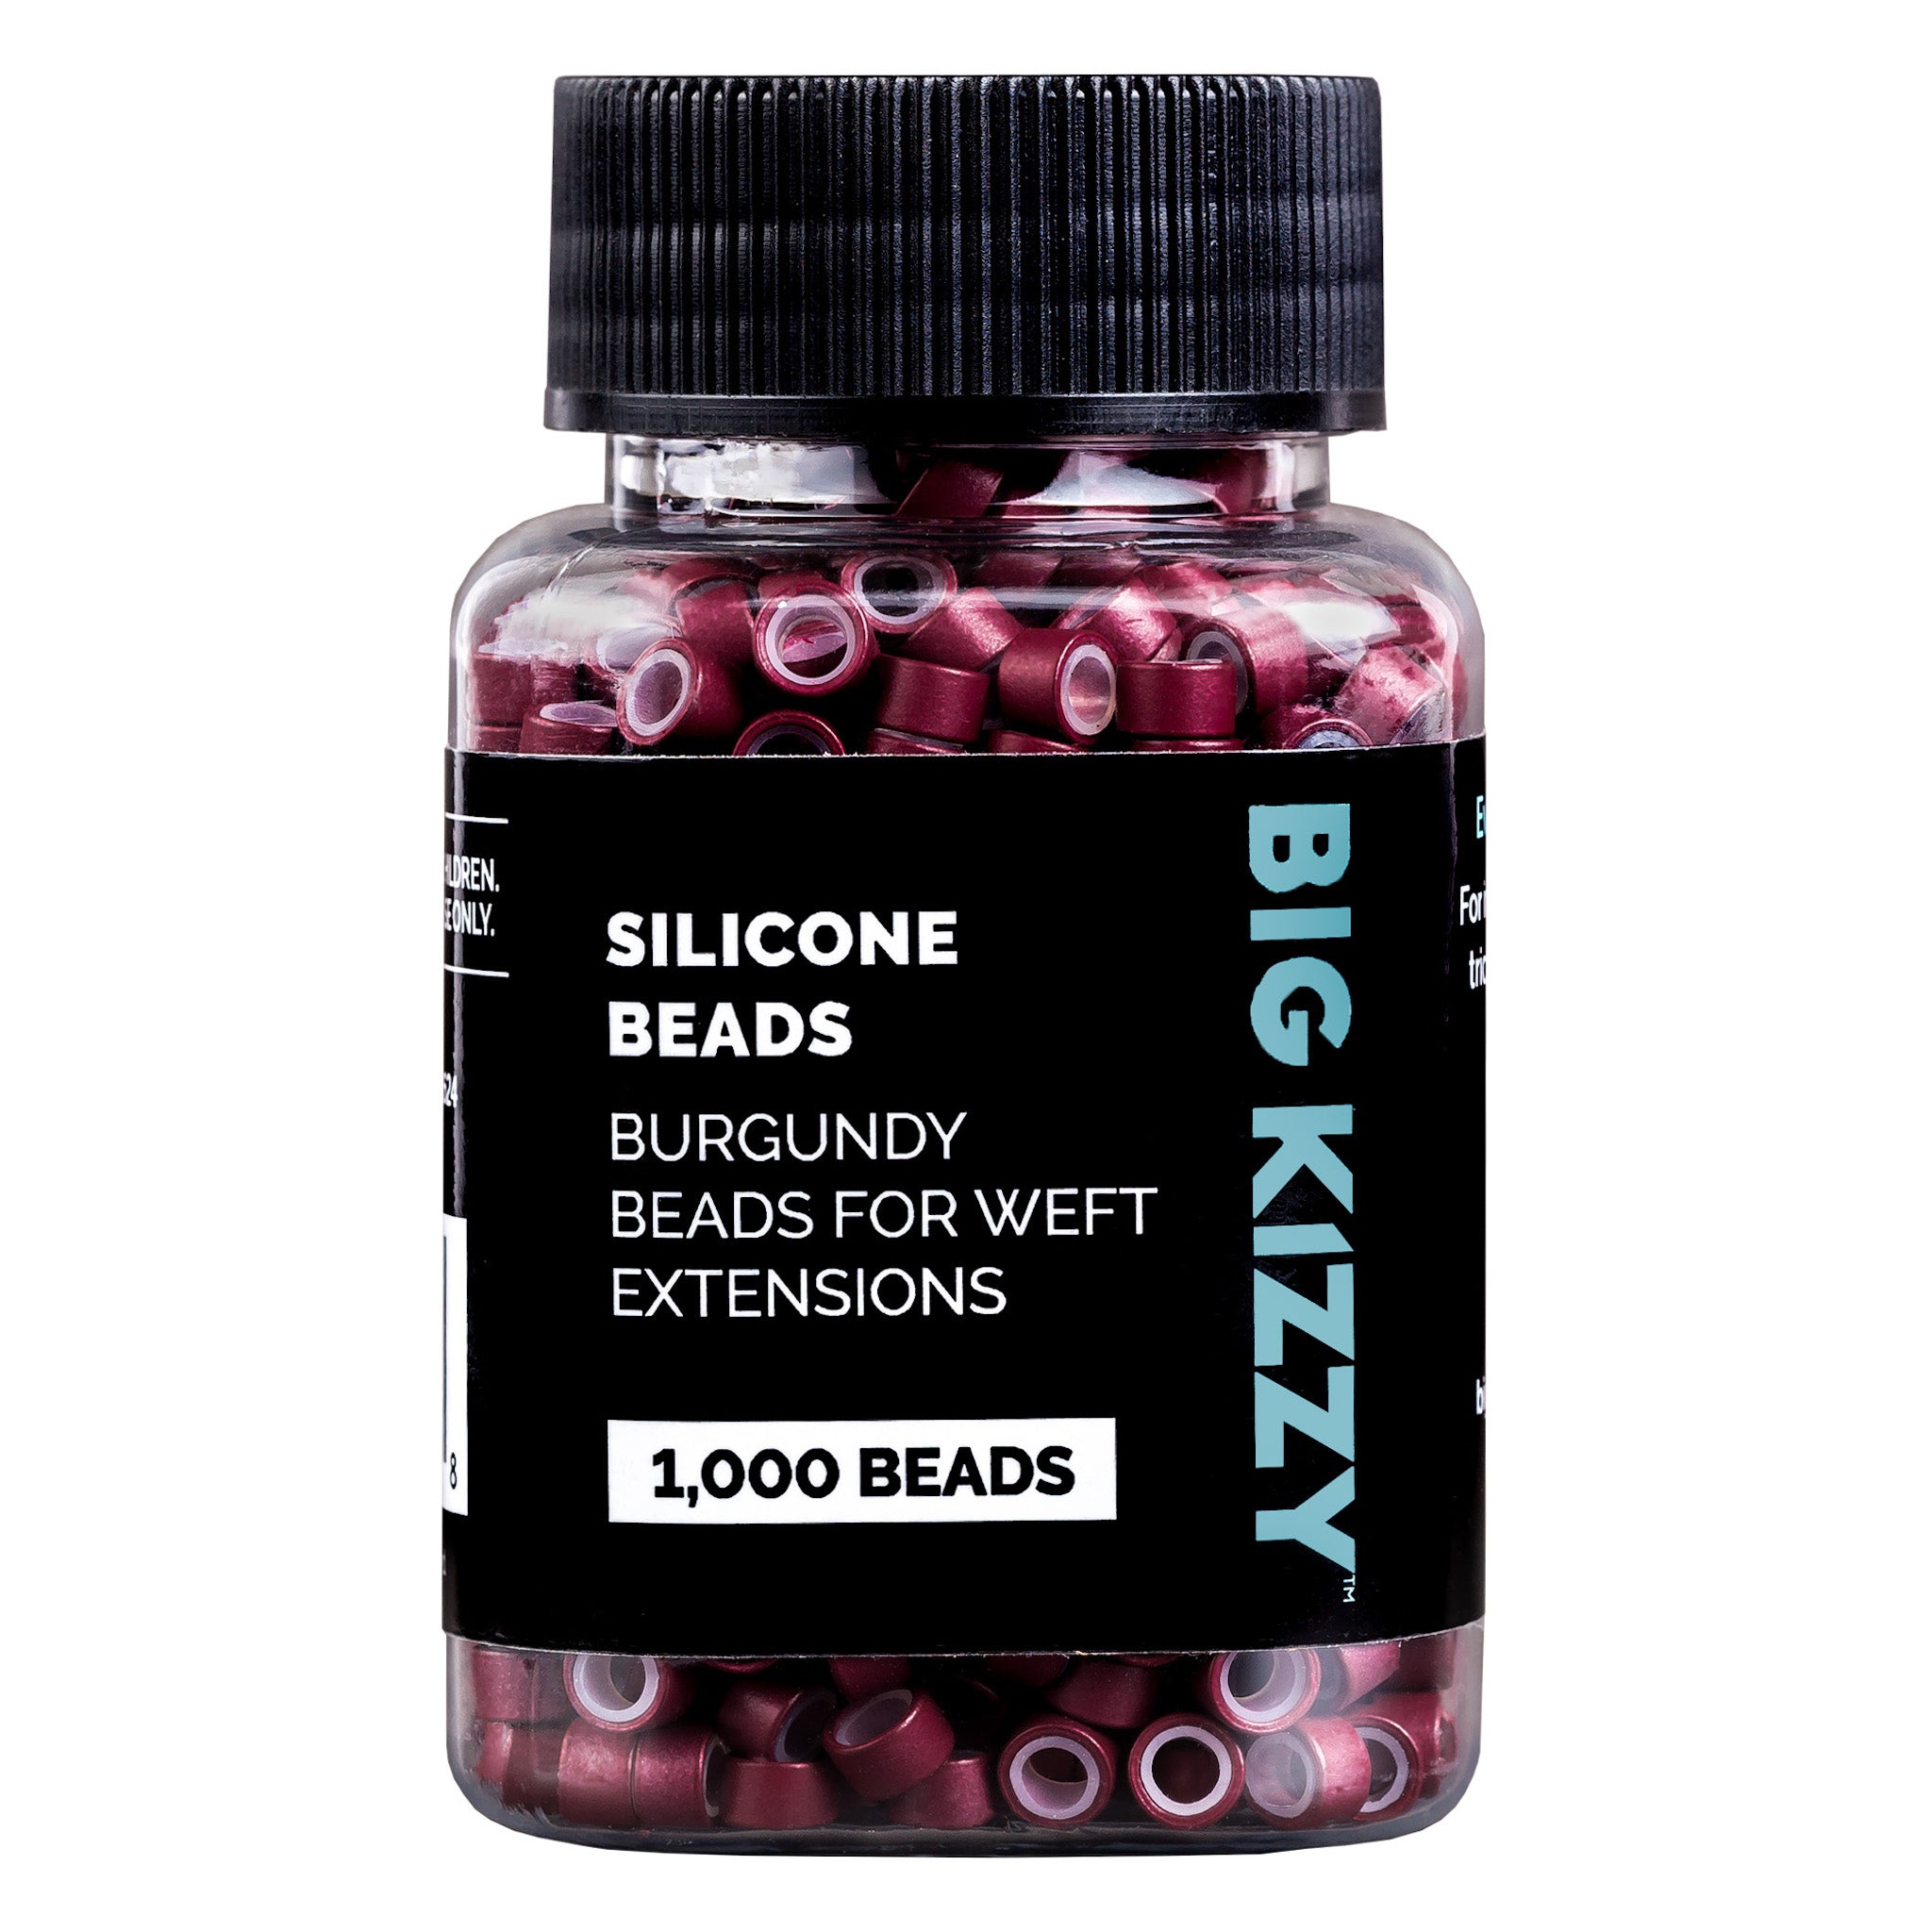 Silicone Beads for Weft Extensions